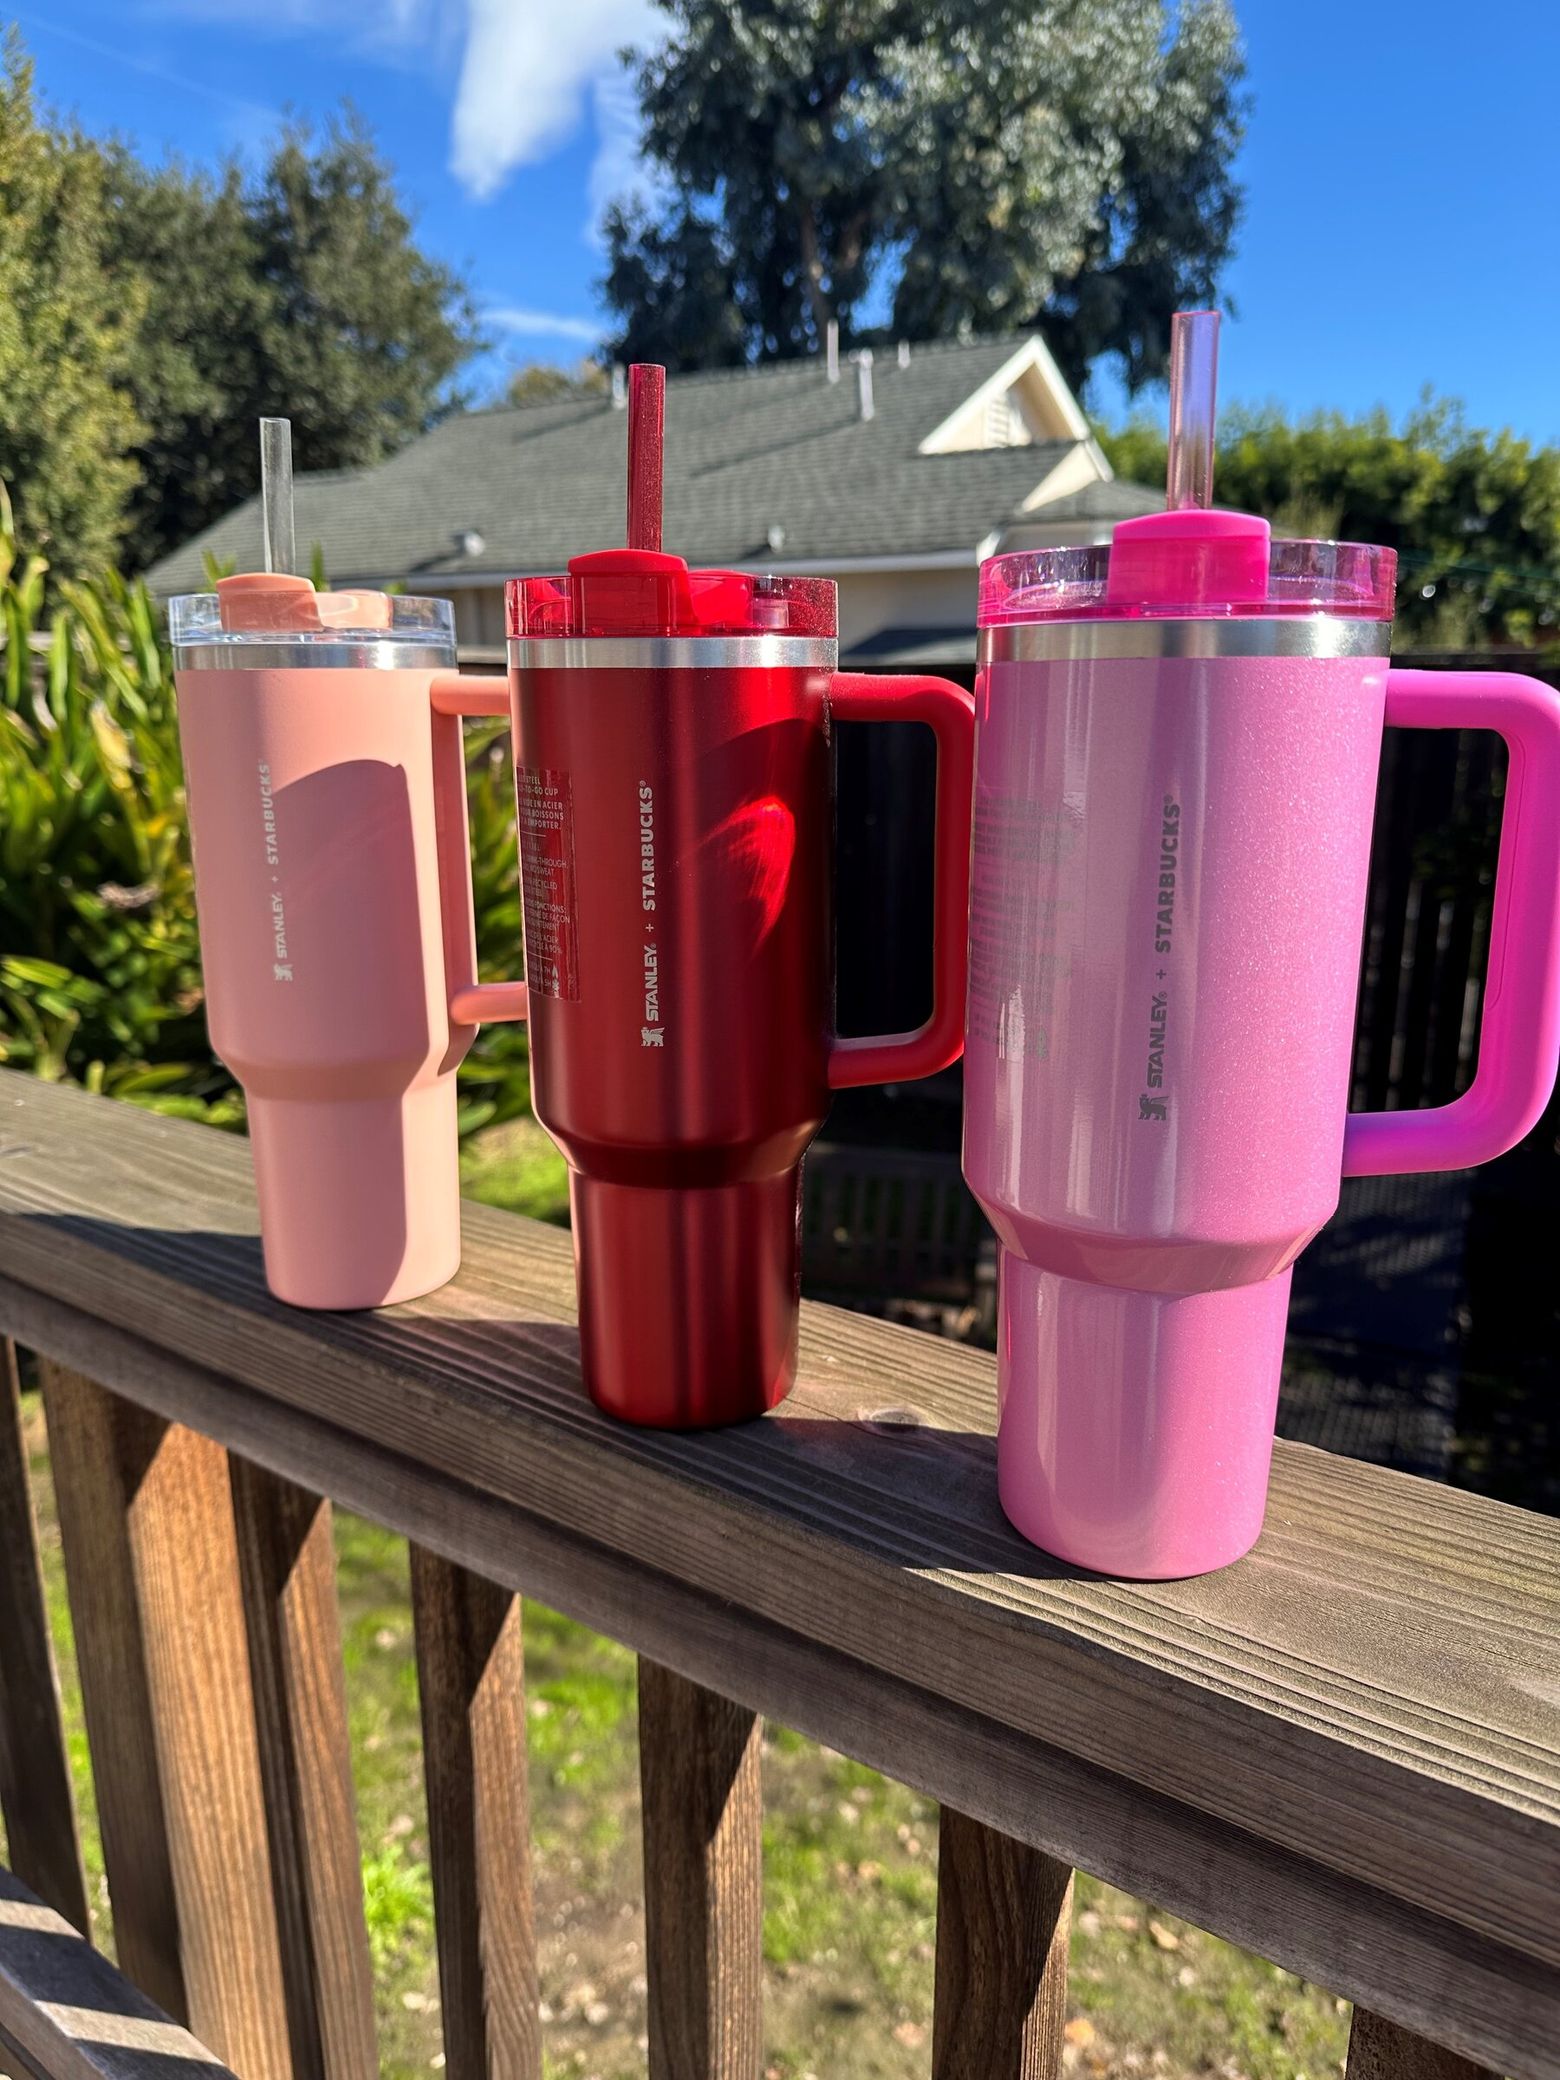 Stanley's Exclusive New Line Of Tumbler Colors Has Arrived At Target